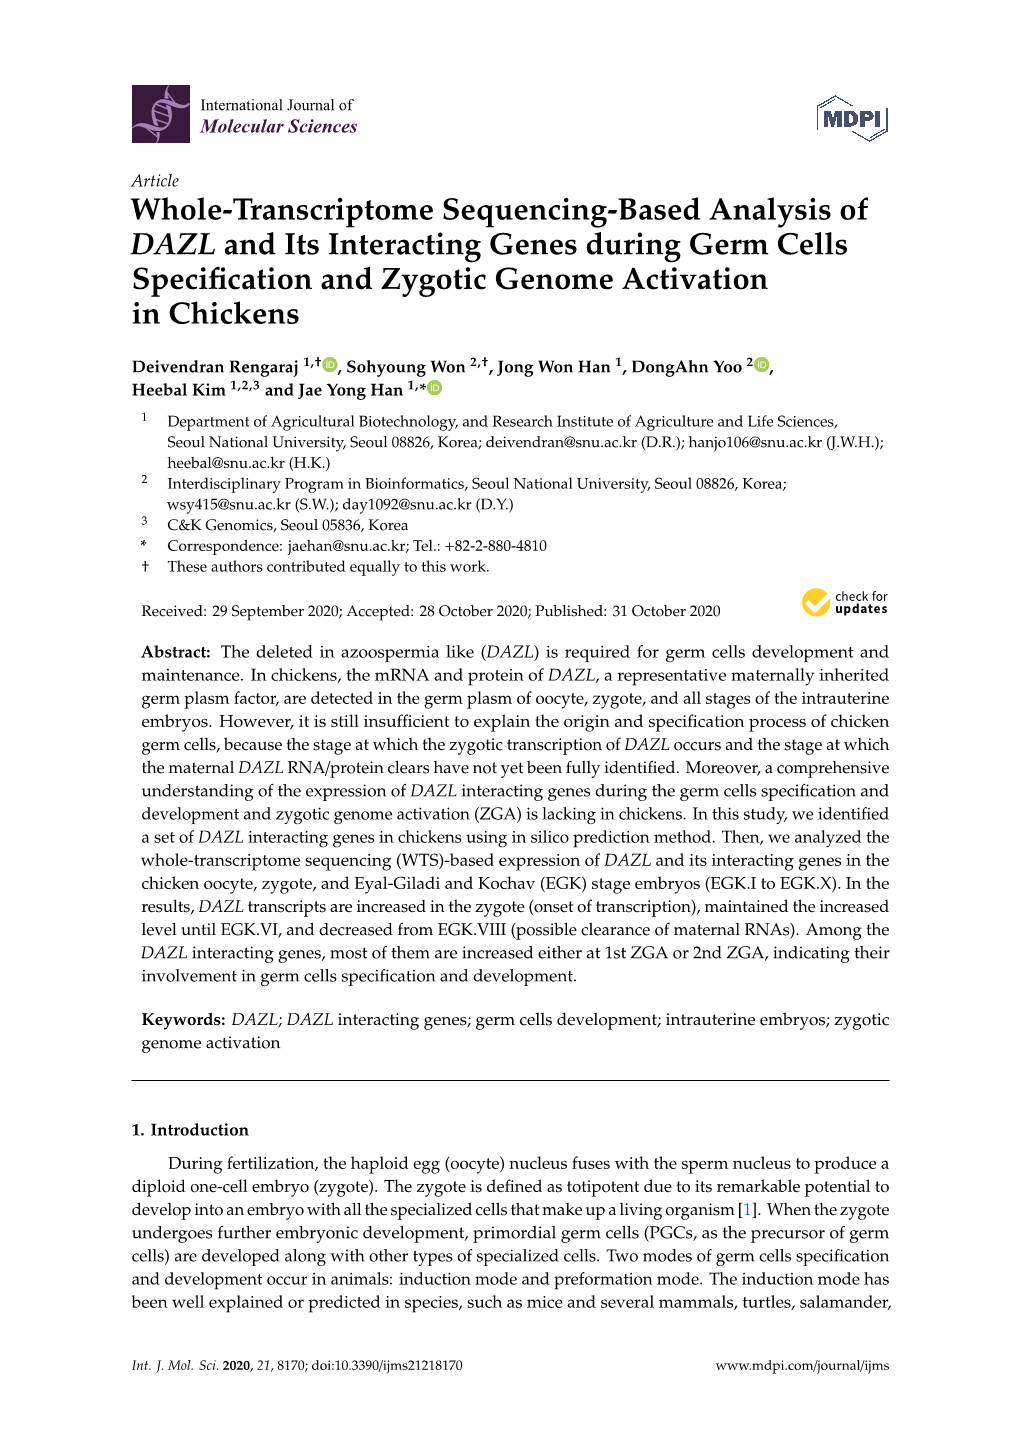 Whole-Transcriptome Sequencing-Based Analysis of DAZL and Its Interacting Genes During Germ Cells Speciﬁcation and Zygotic Genome Activation in Chickens